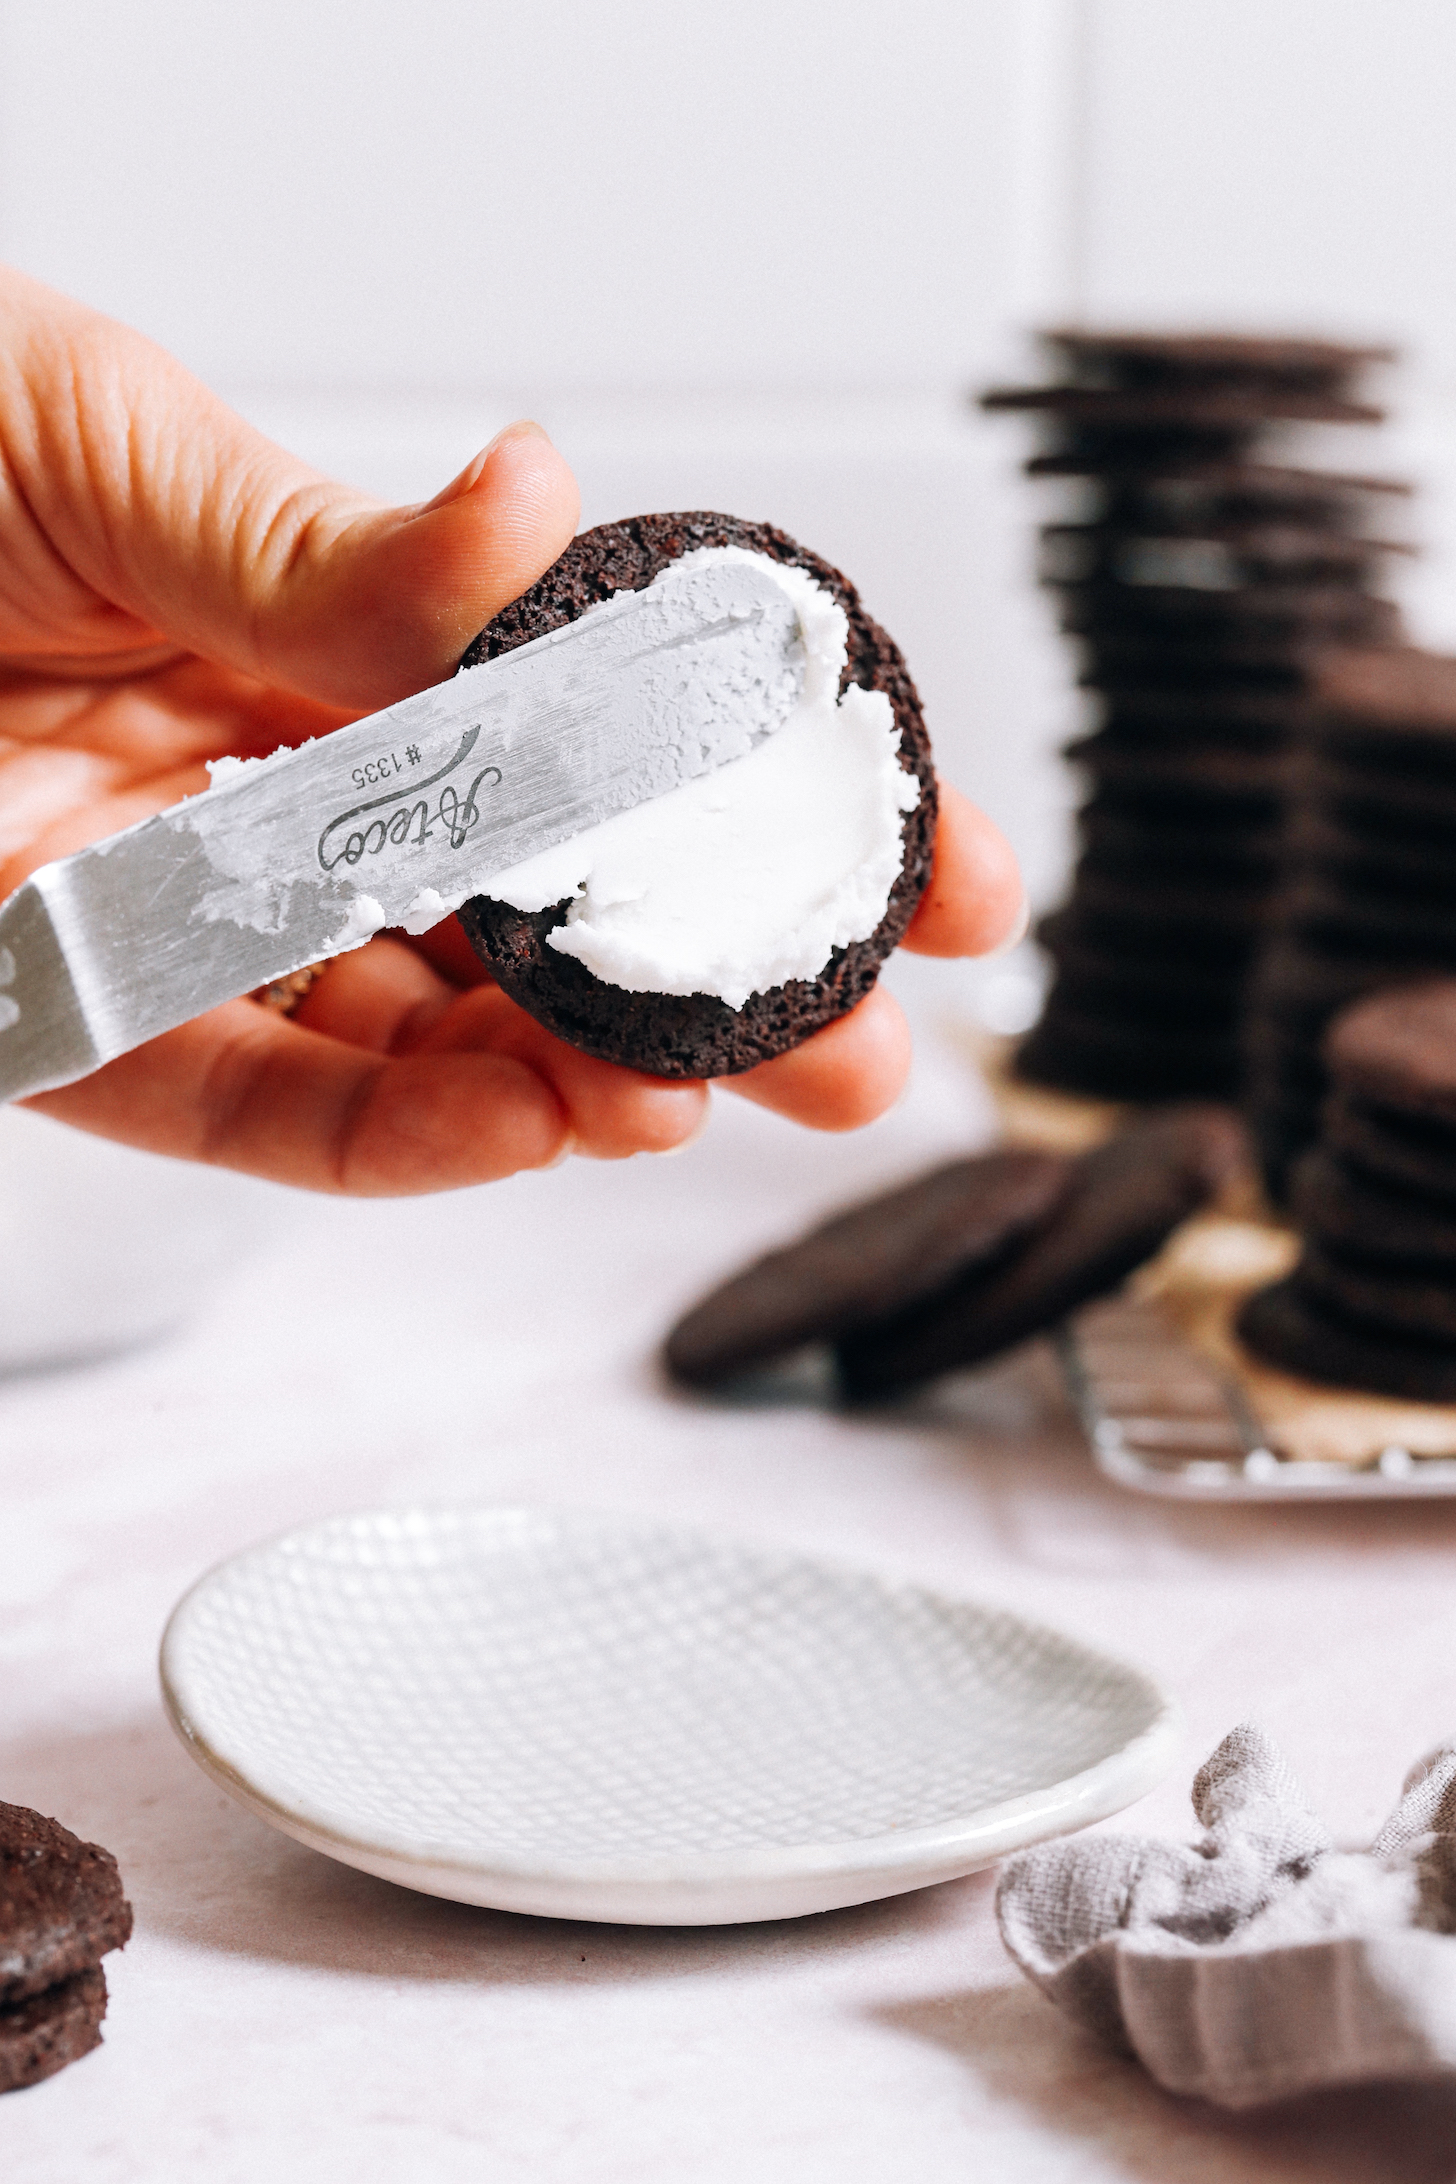 Spreading homemade Oreo filling onto a chocolate cookie